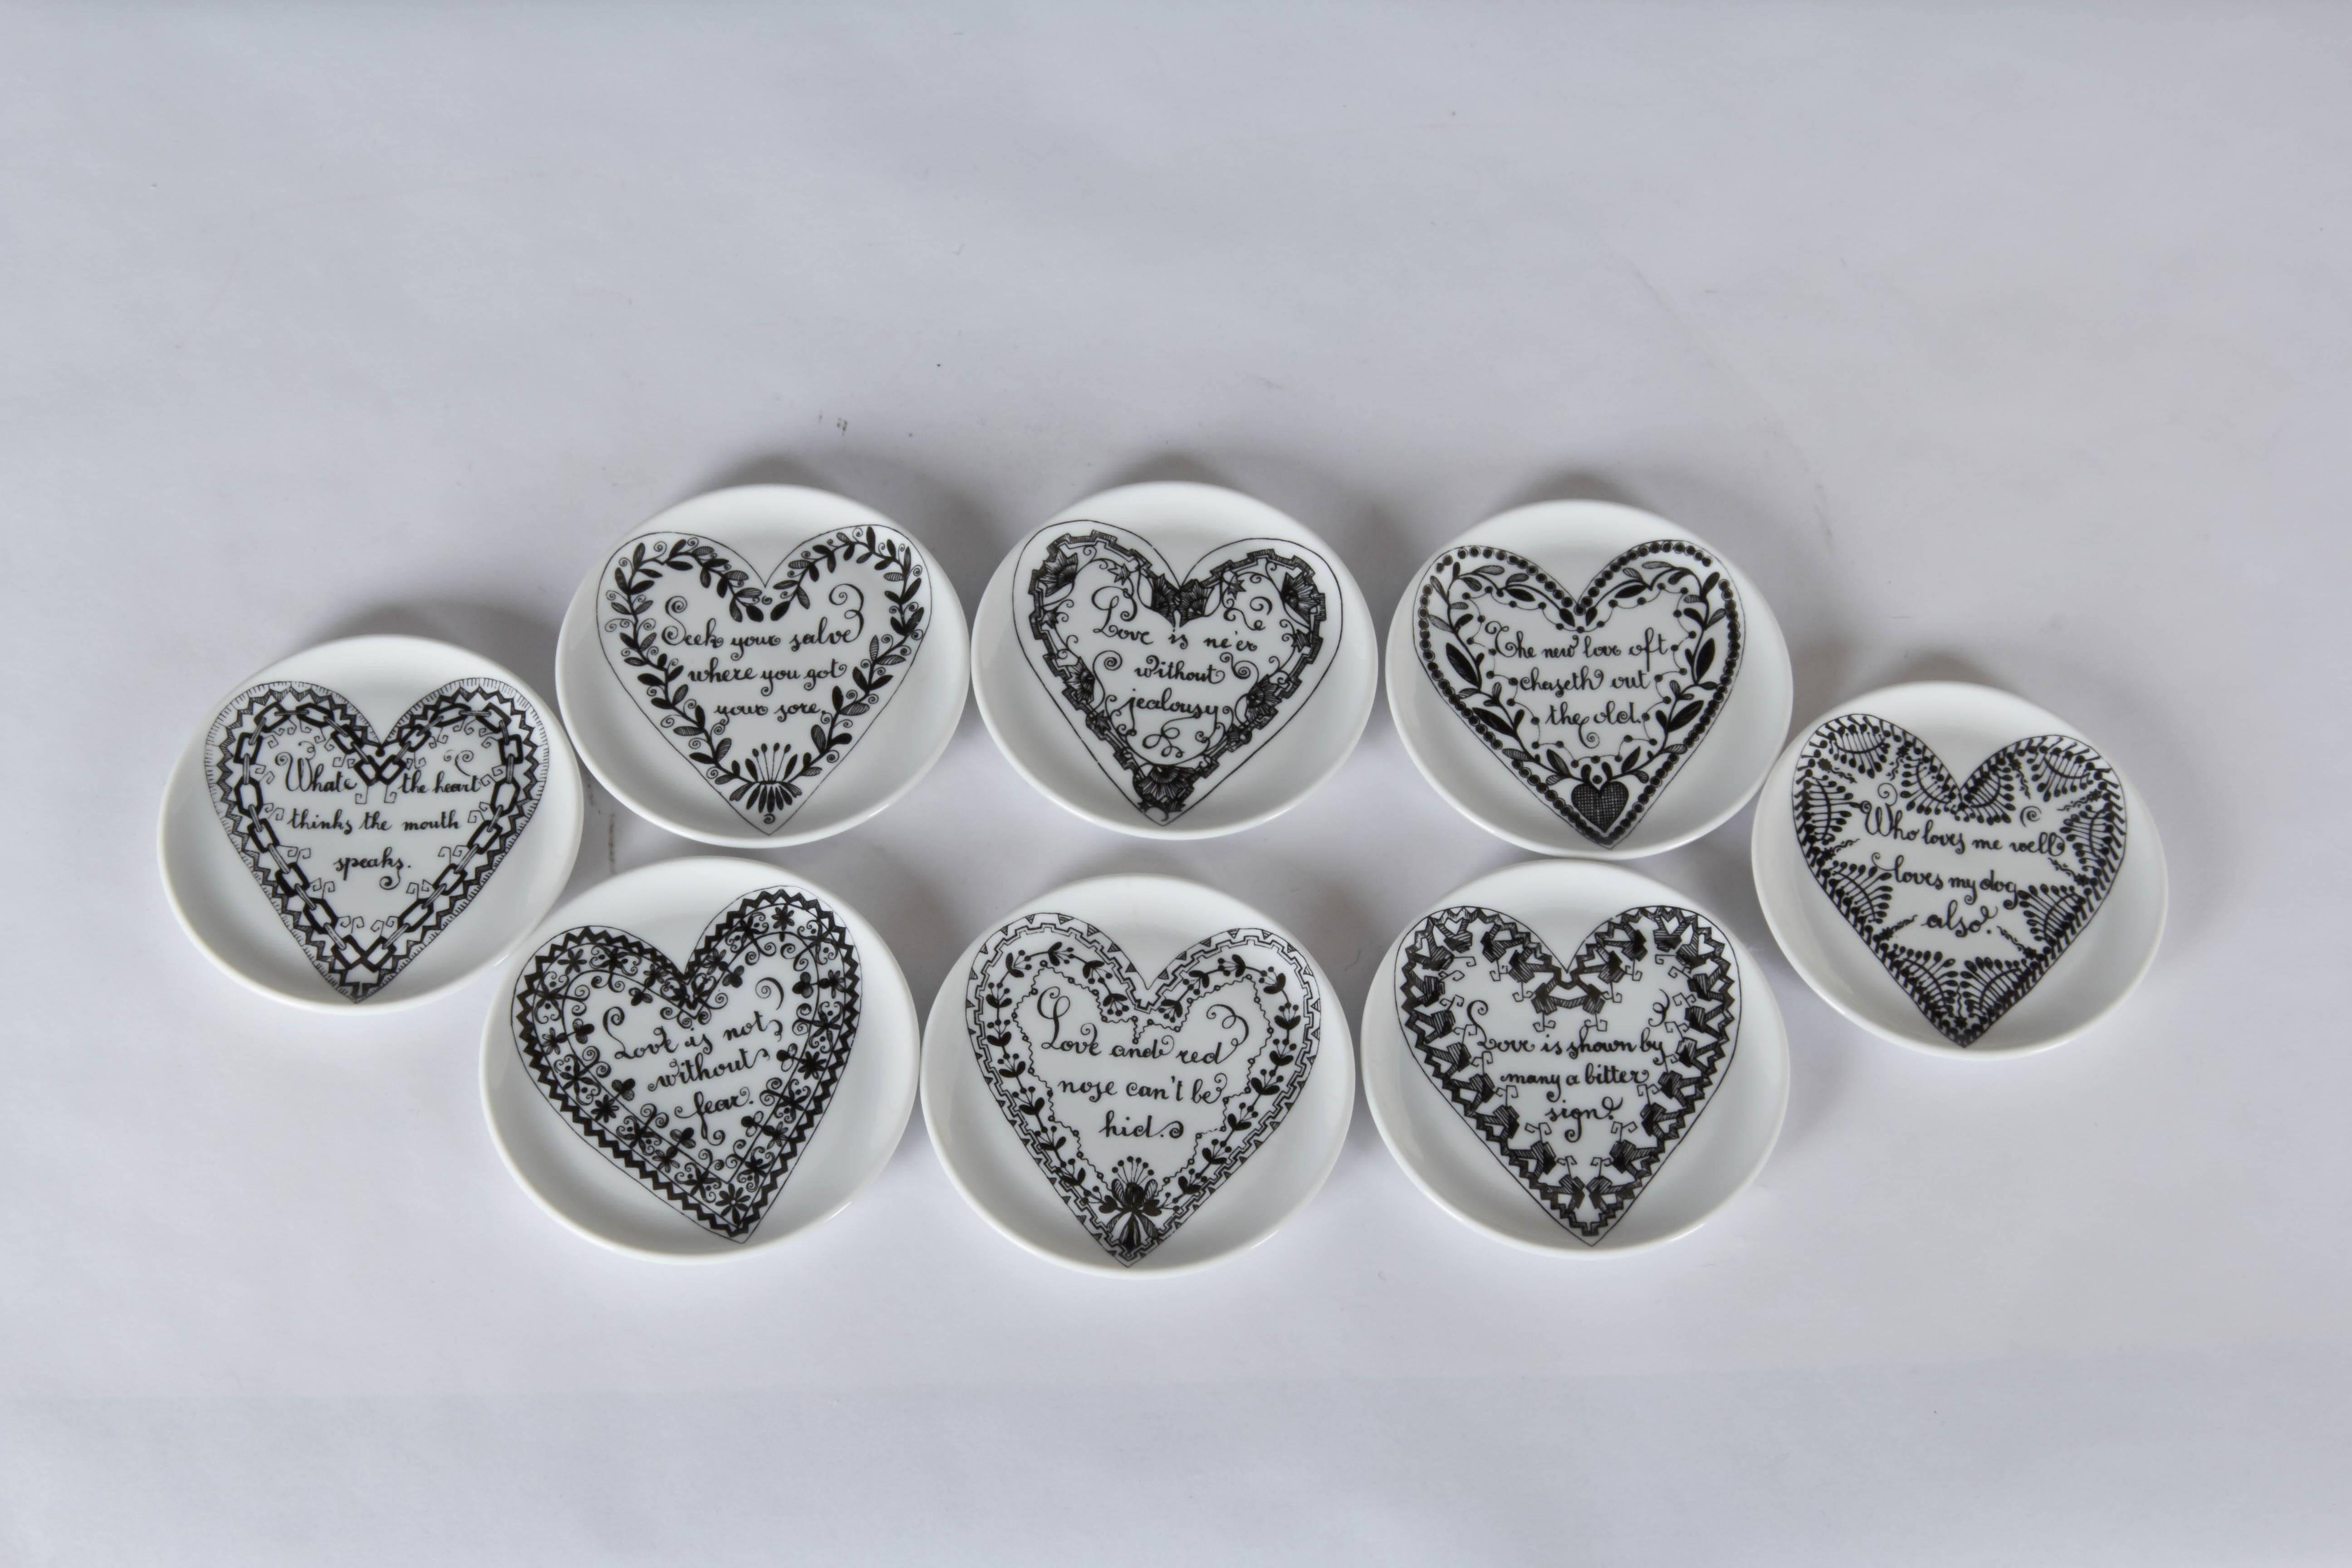 A rare set of eight porcelain coasters by Piero Fornasetti, produced in Italy, circa 1960s, decorated with individual proverbs and sayings on the nature of love; original box, measuring 3